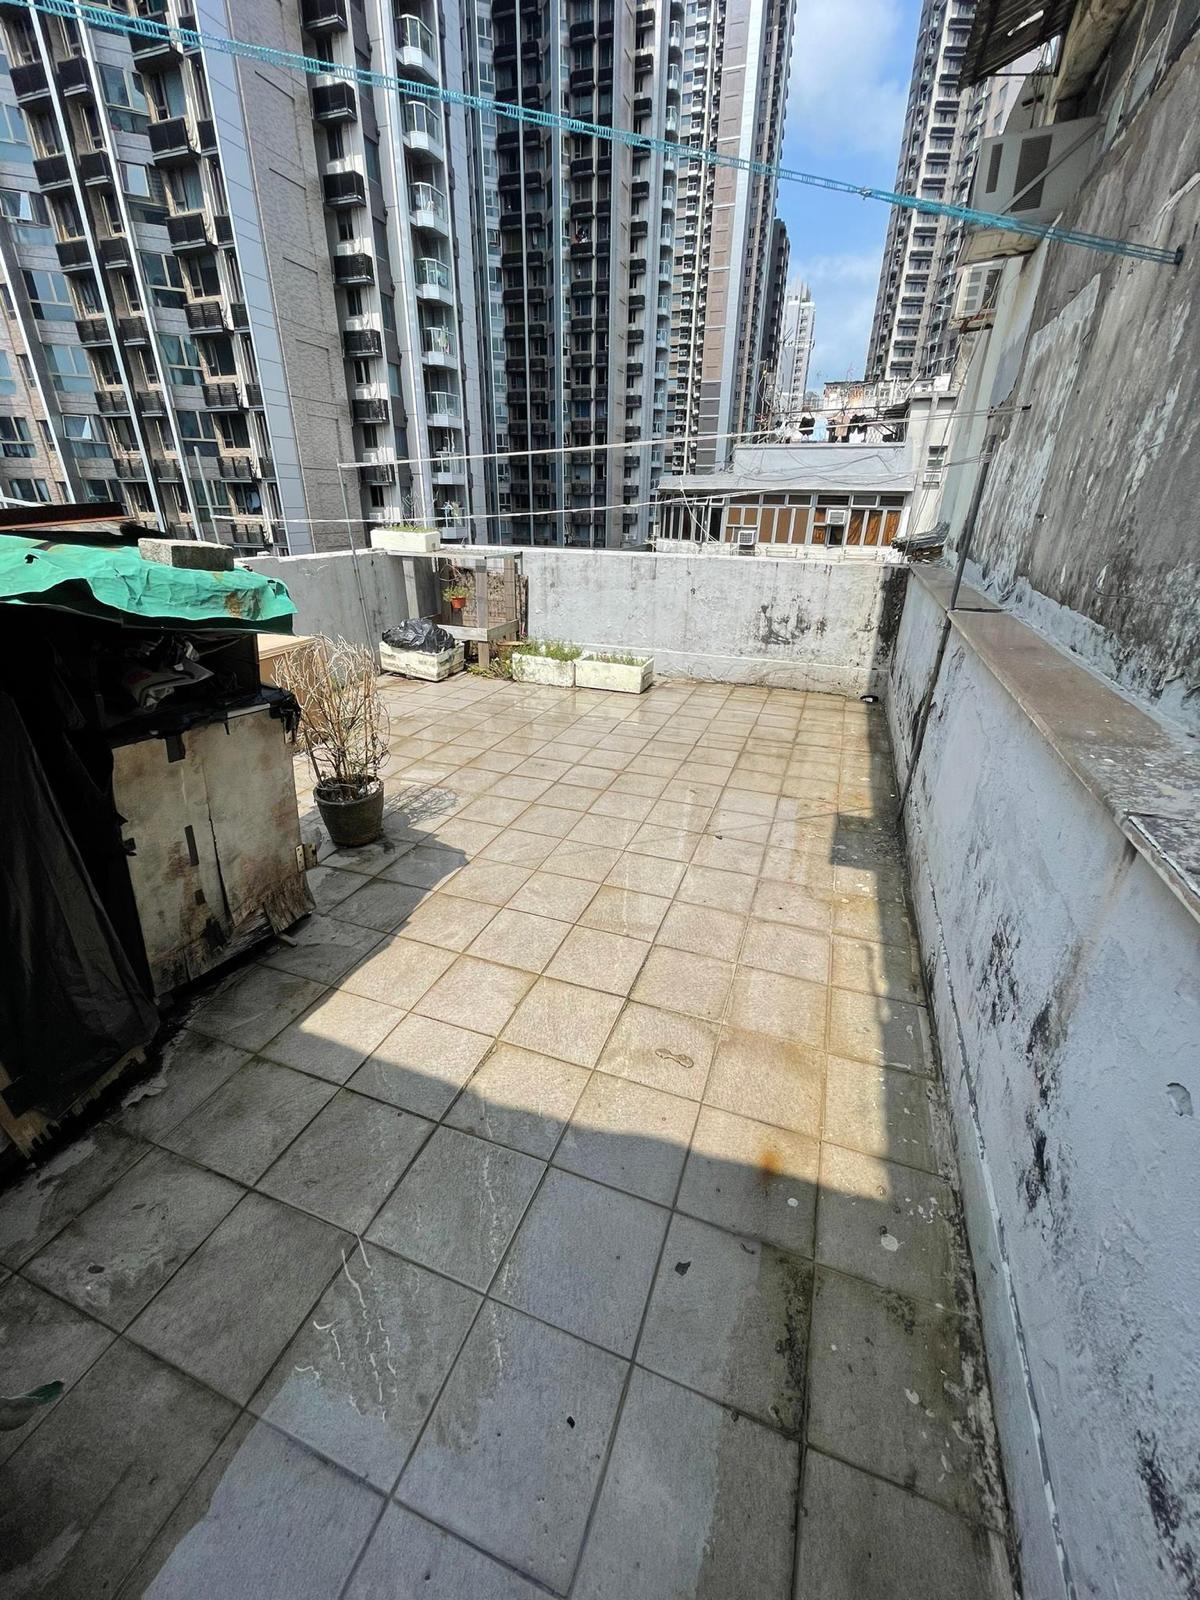 The Home Affairs Department and its District Offices conducted a series of cleaning works, publicity and educational activities during July and September to support the Government Programme on Tackling Hygiene Black Spots launched under the District Matters Co-ordination Task Force. Photo shows the rooftop of a "three-nil" building in Sham Shui Po after cleaning services were arranged by the Home Affairs Department.